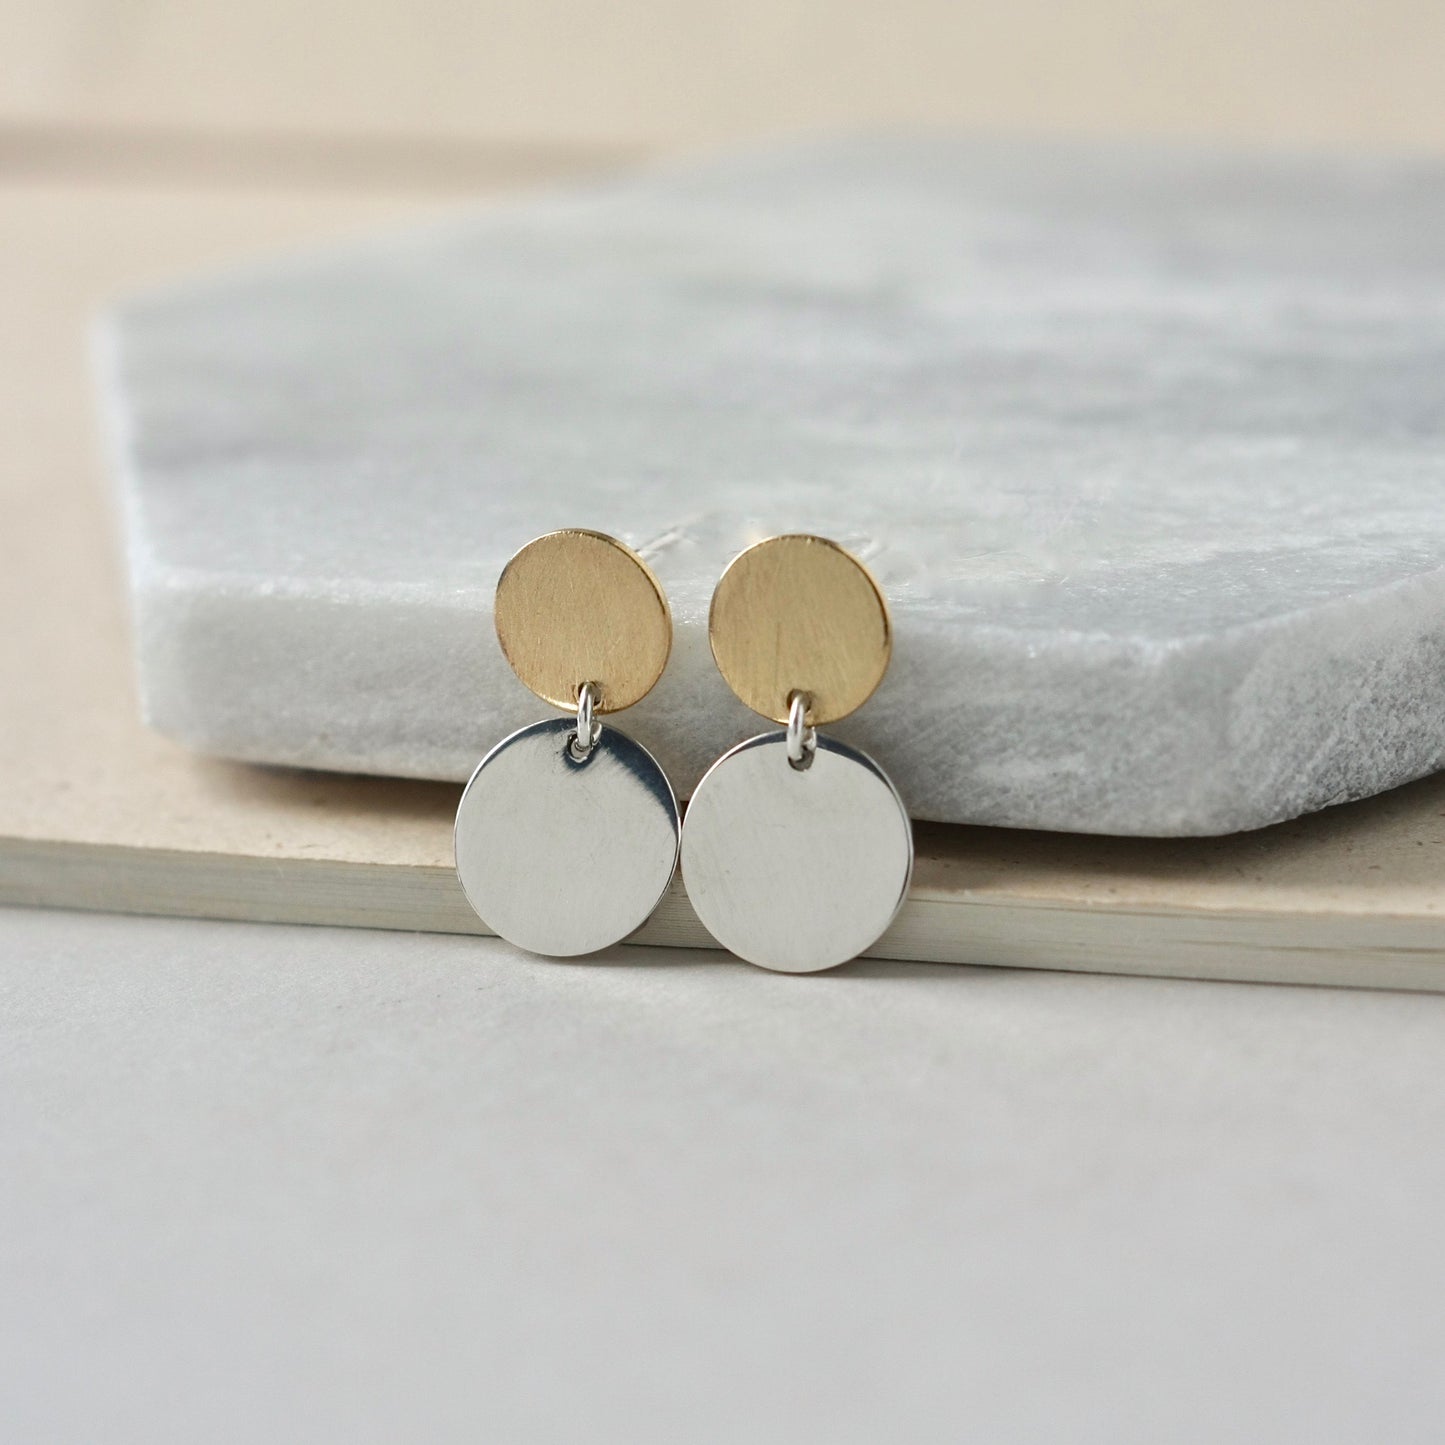 Mixed Metal Sterling Silver and Brass Circle Stud Earrings